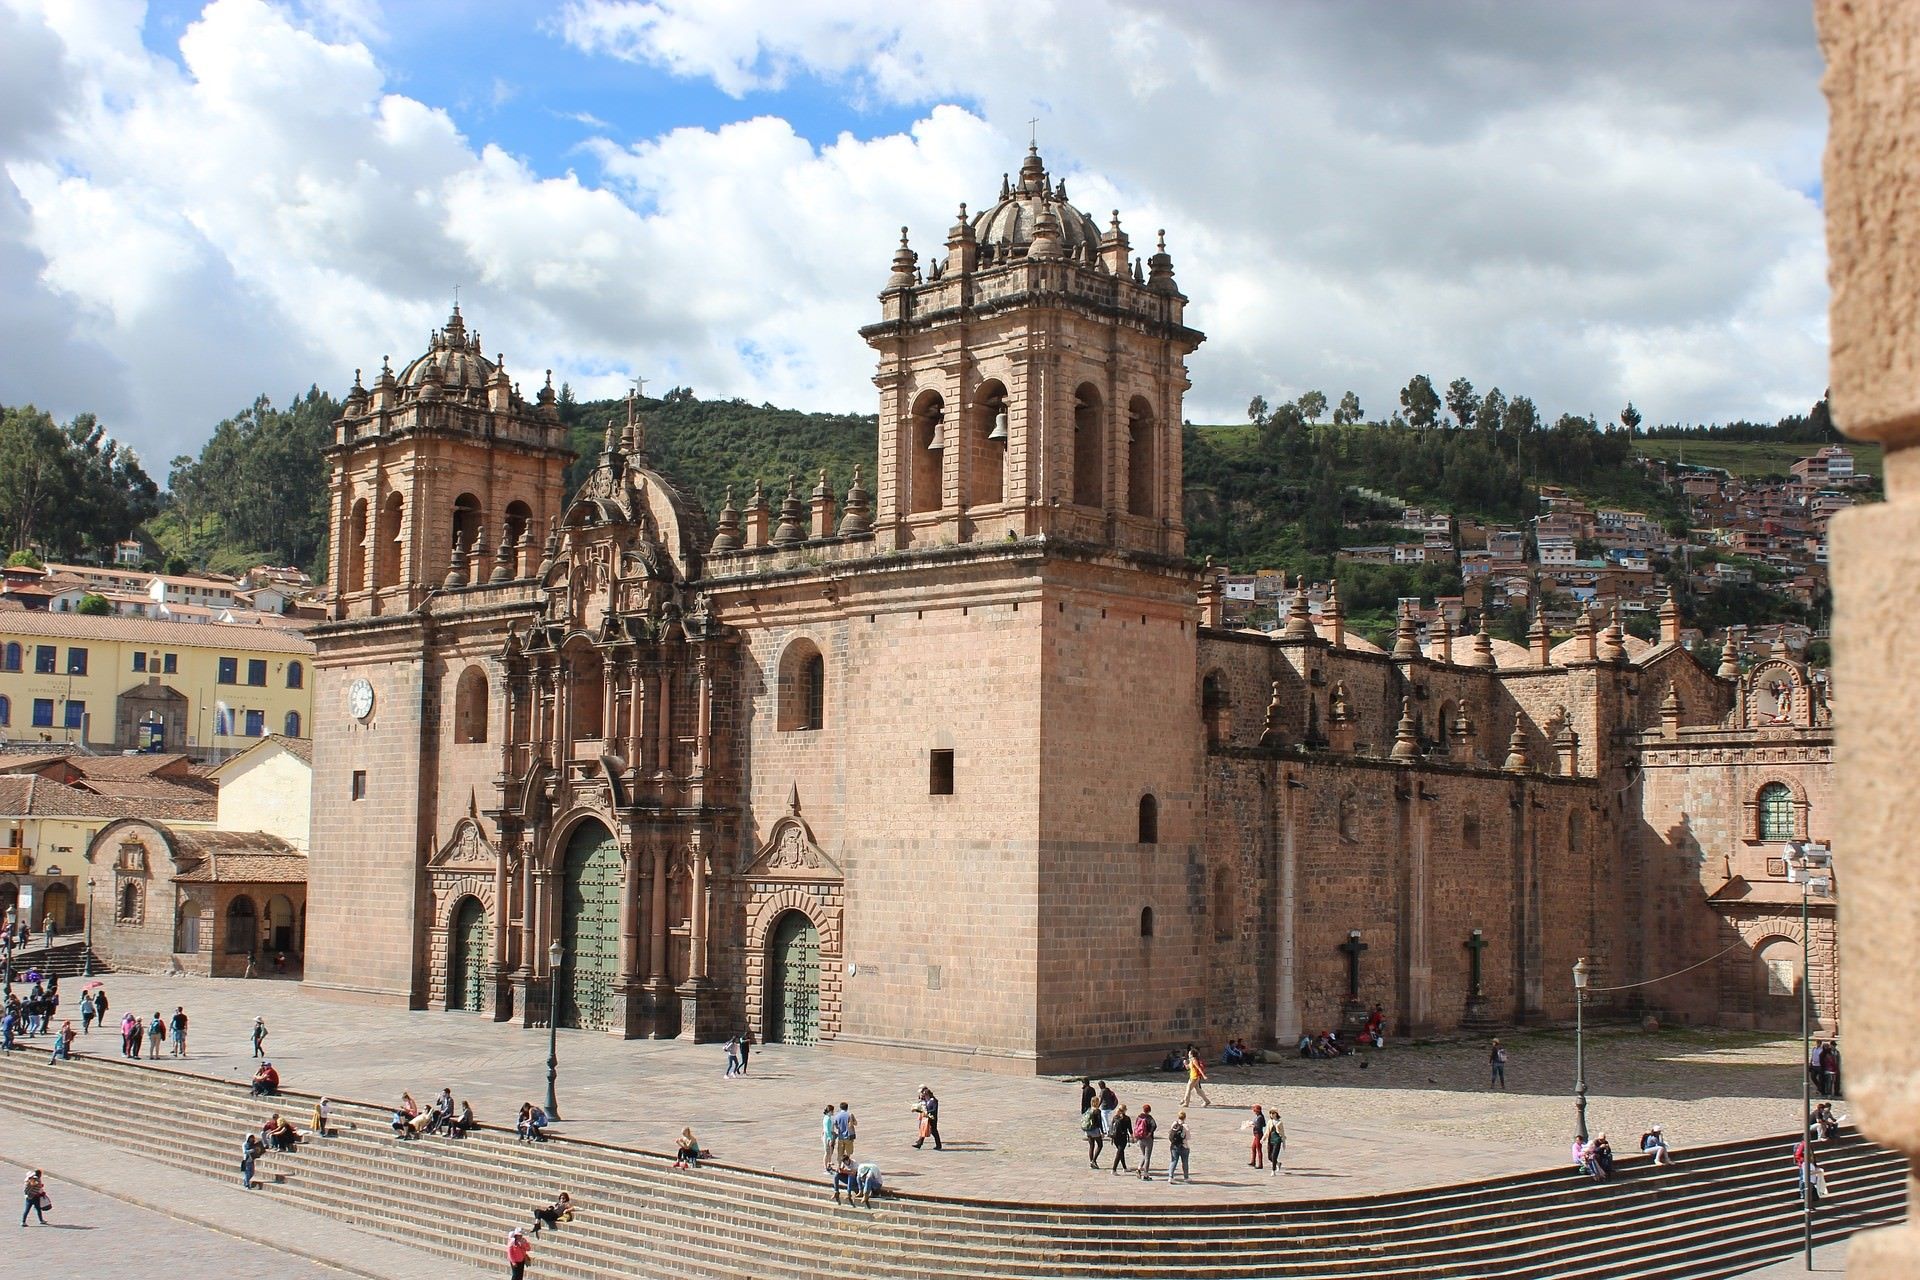 Cusco's architecture is worth checking out.